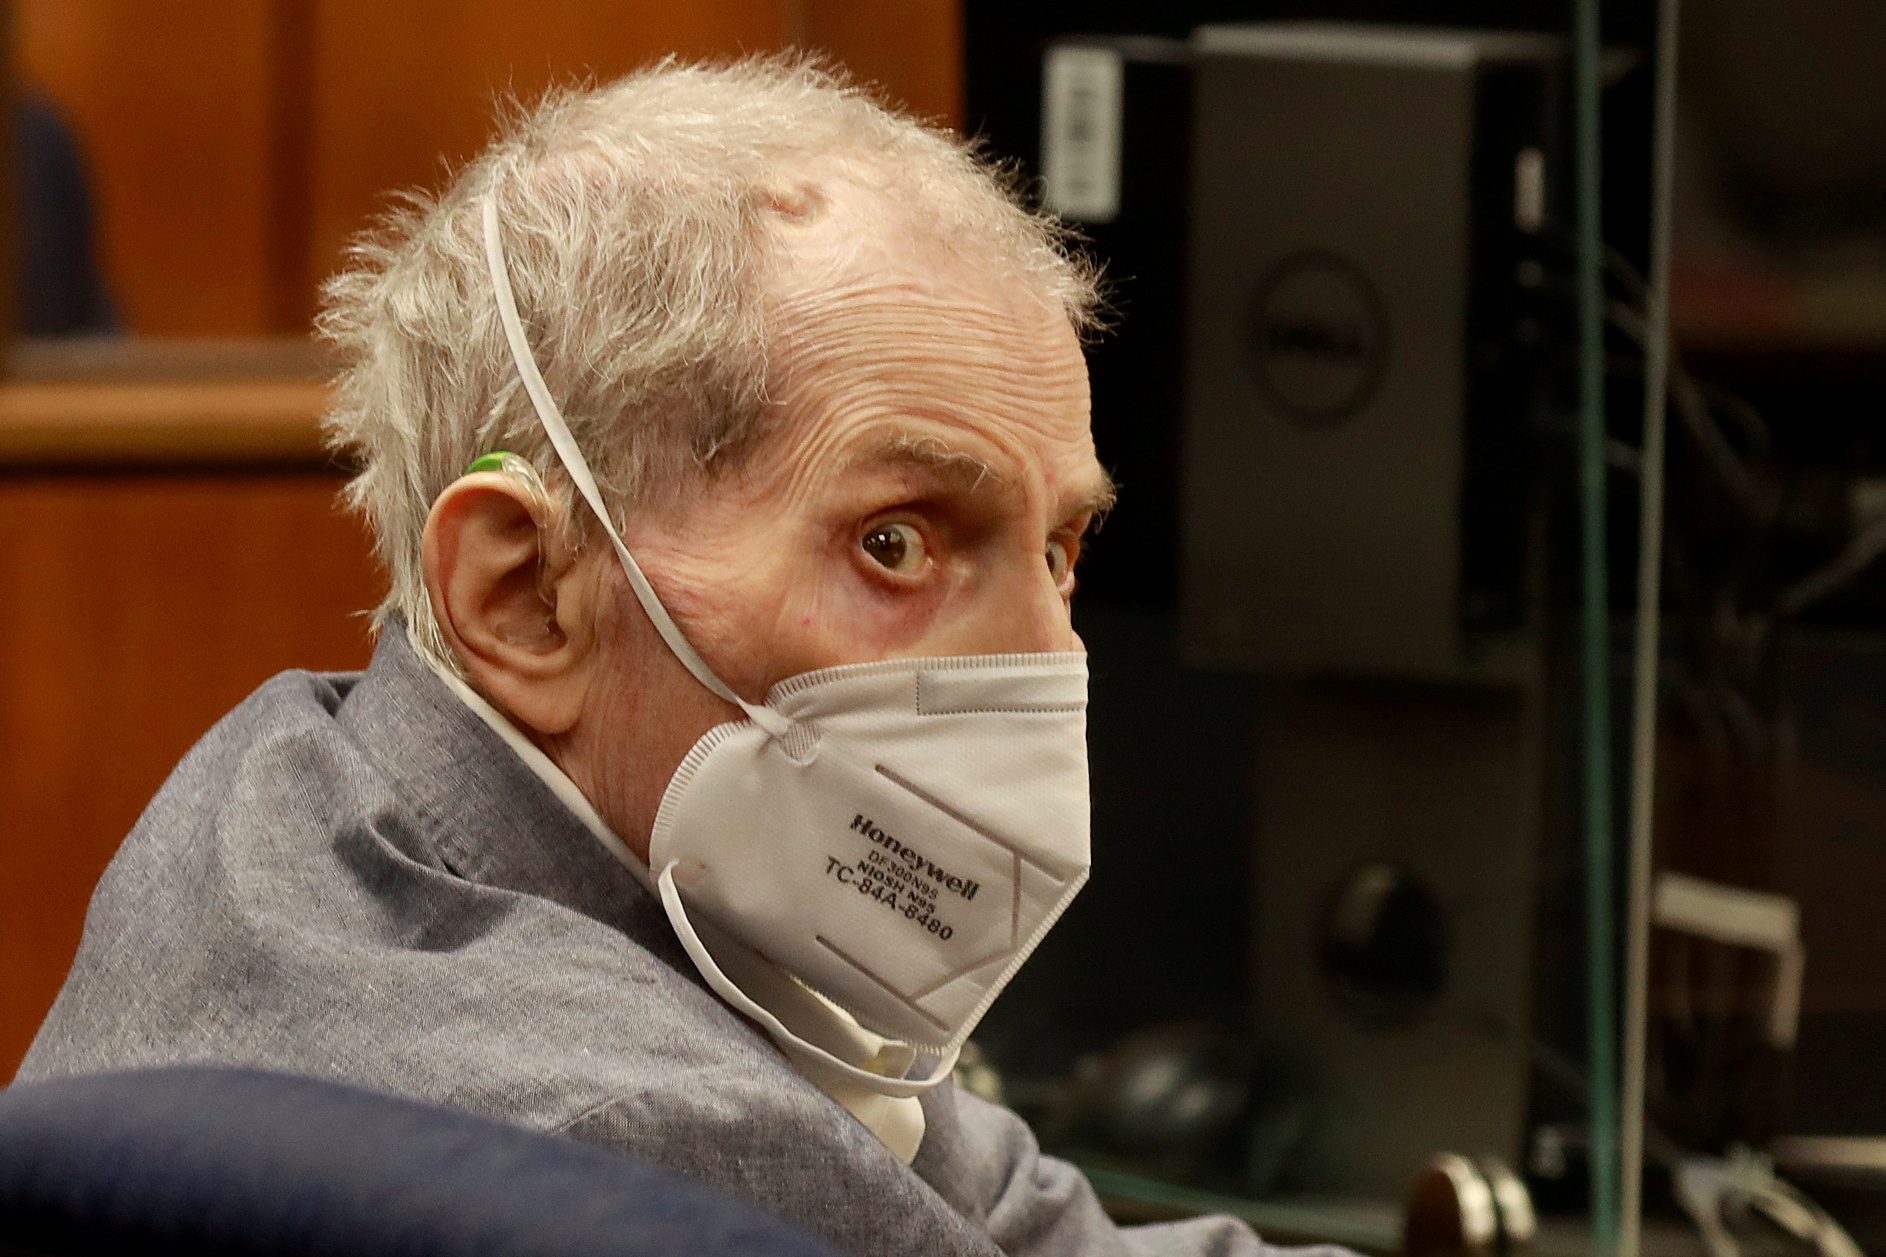 Robert Durst, real estate heir convicted of murder, dead at age 78